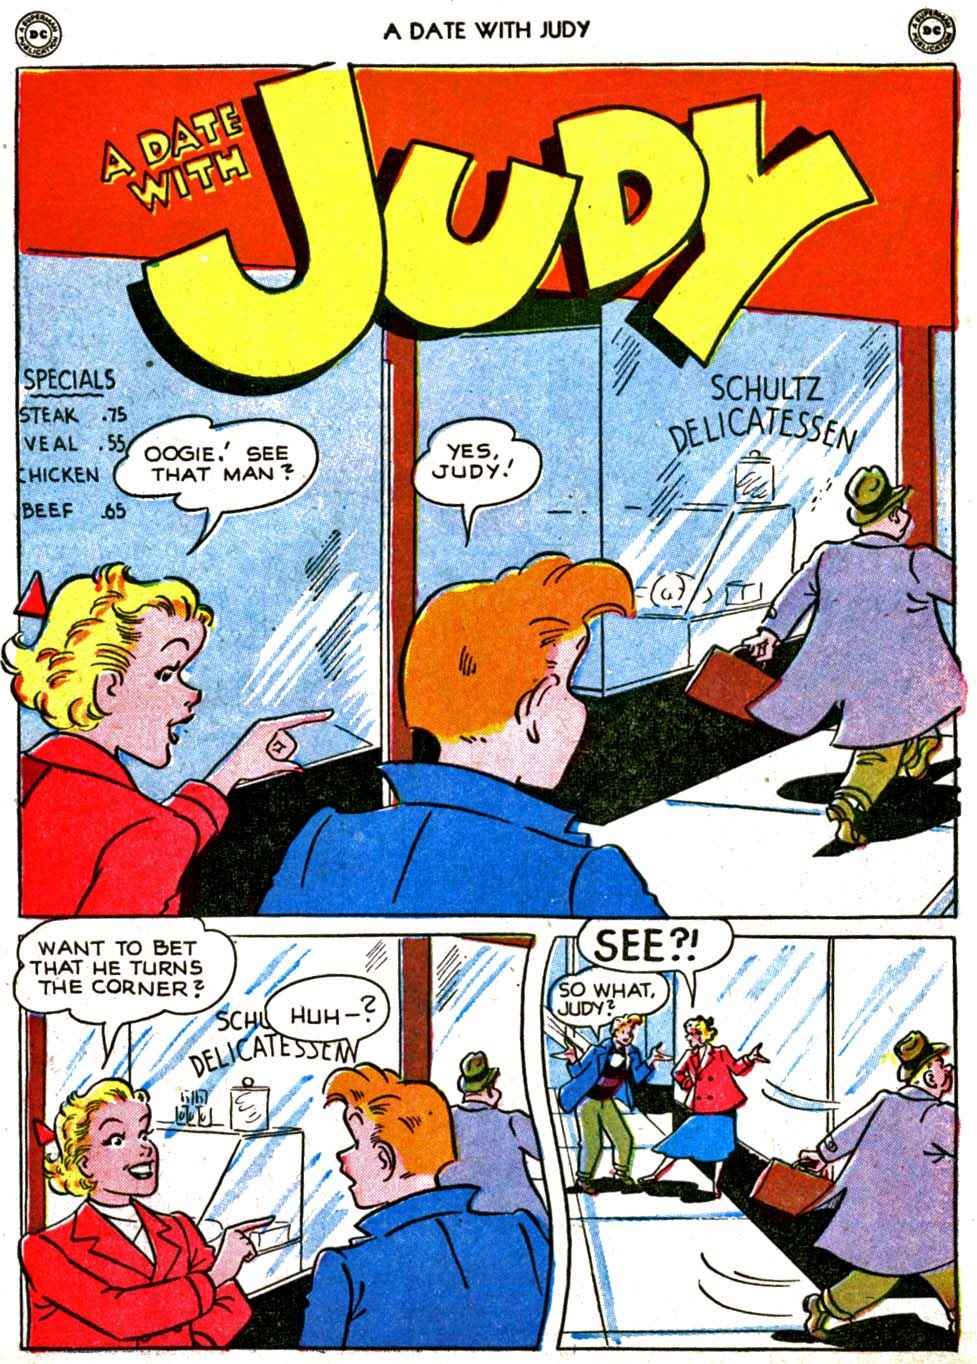 Read online A Date with Judy comic -  Issue #12 - 3